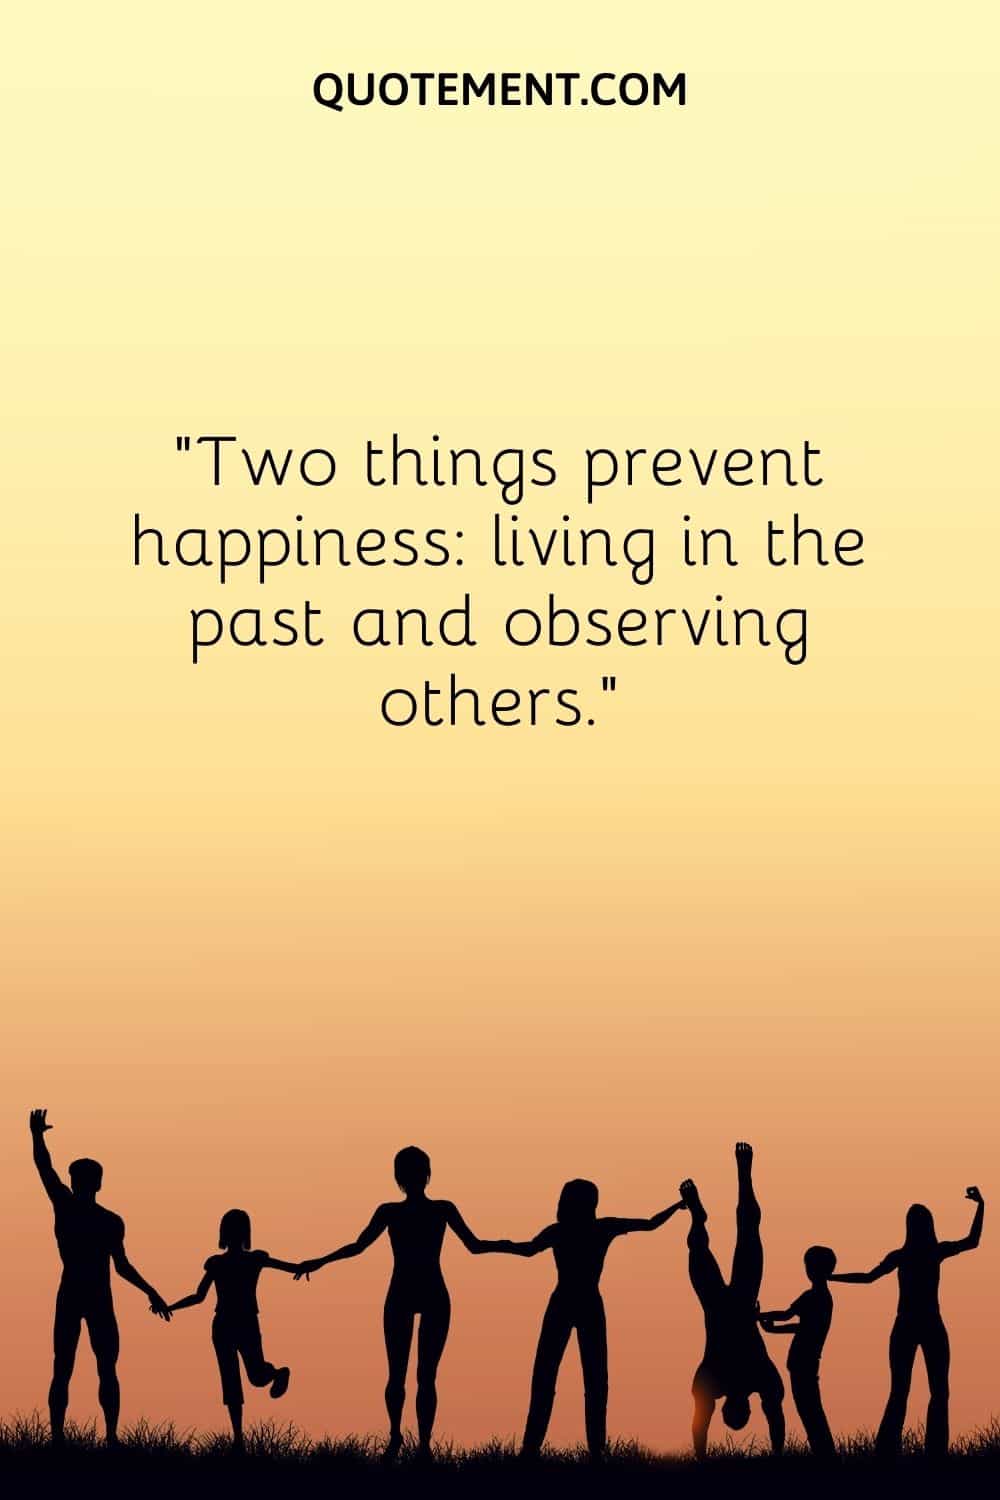 Two things prevent happiness living in the past and observing others